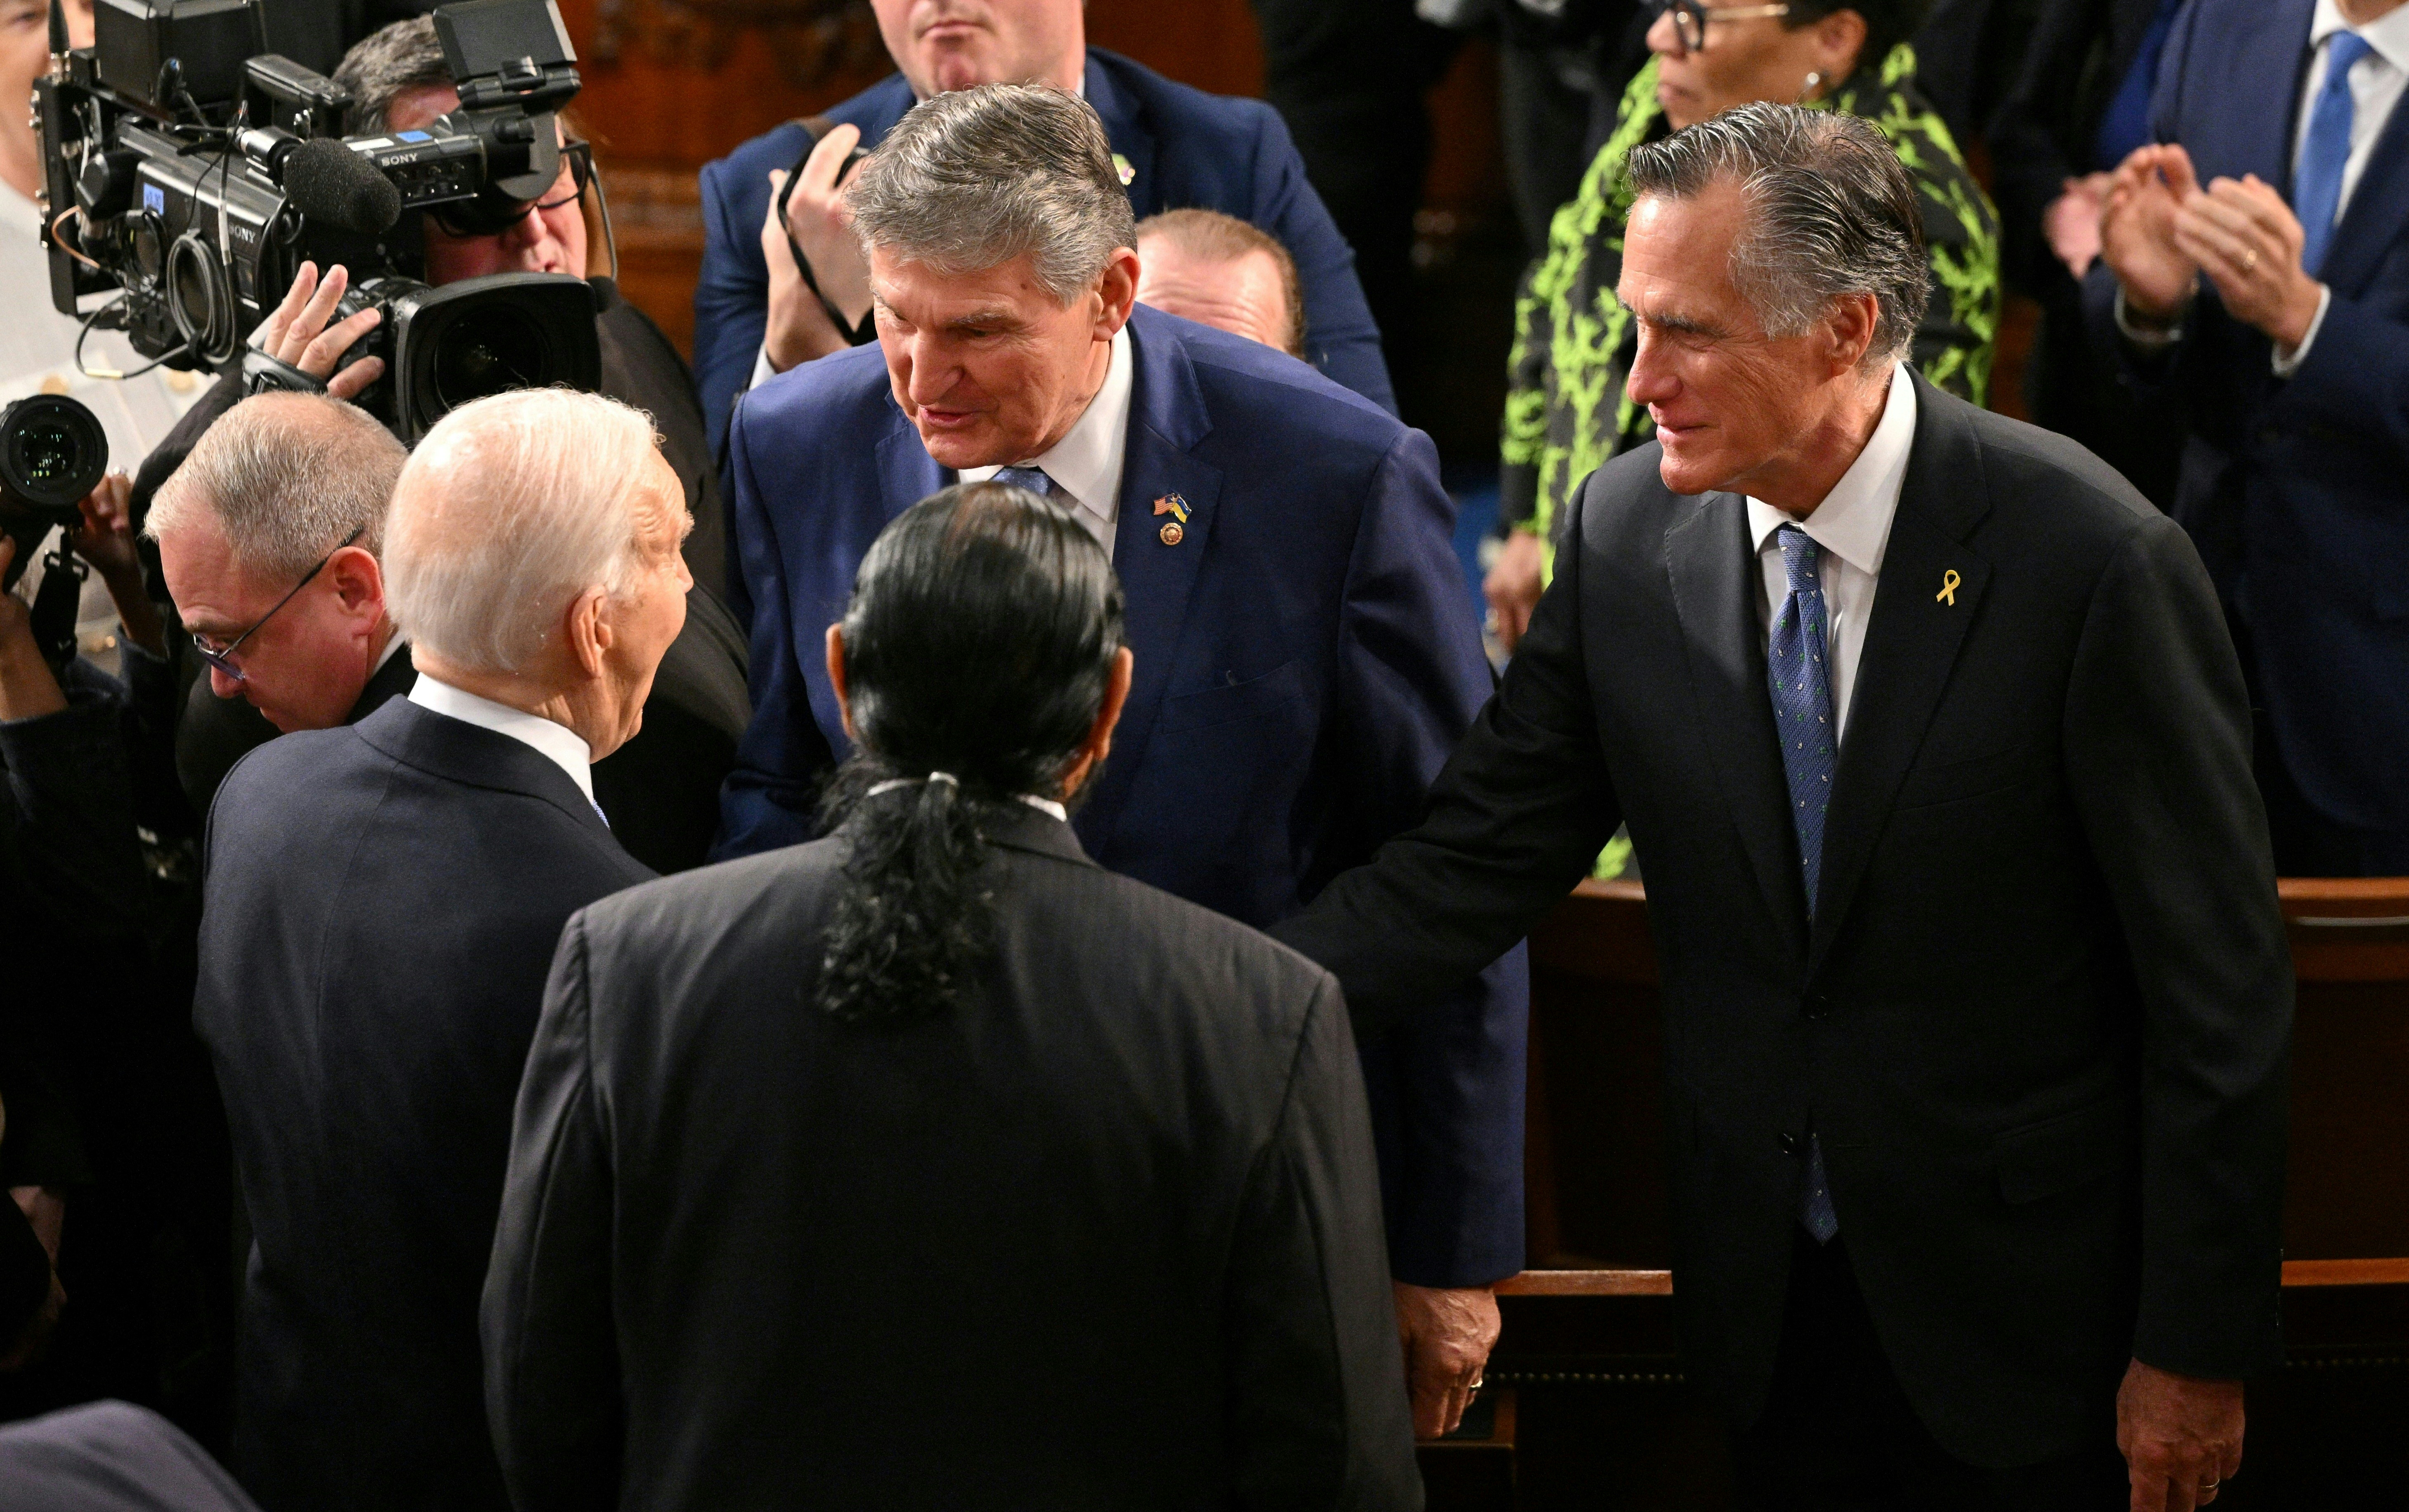 President Joe Biden speaks with Sen. Mitt Romney, right, and Sen. Joe Manchin as he arrives to deliver the State of the Union address.